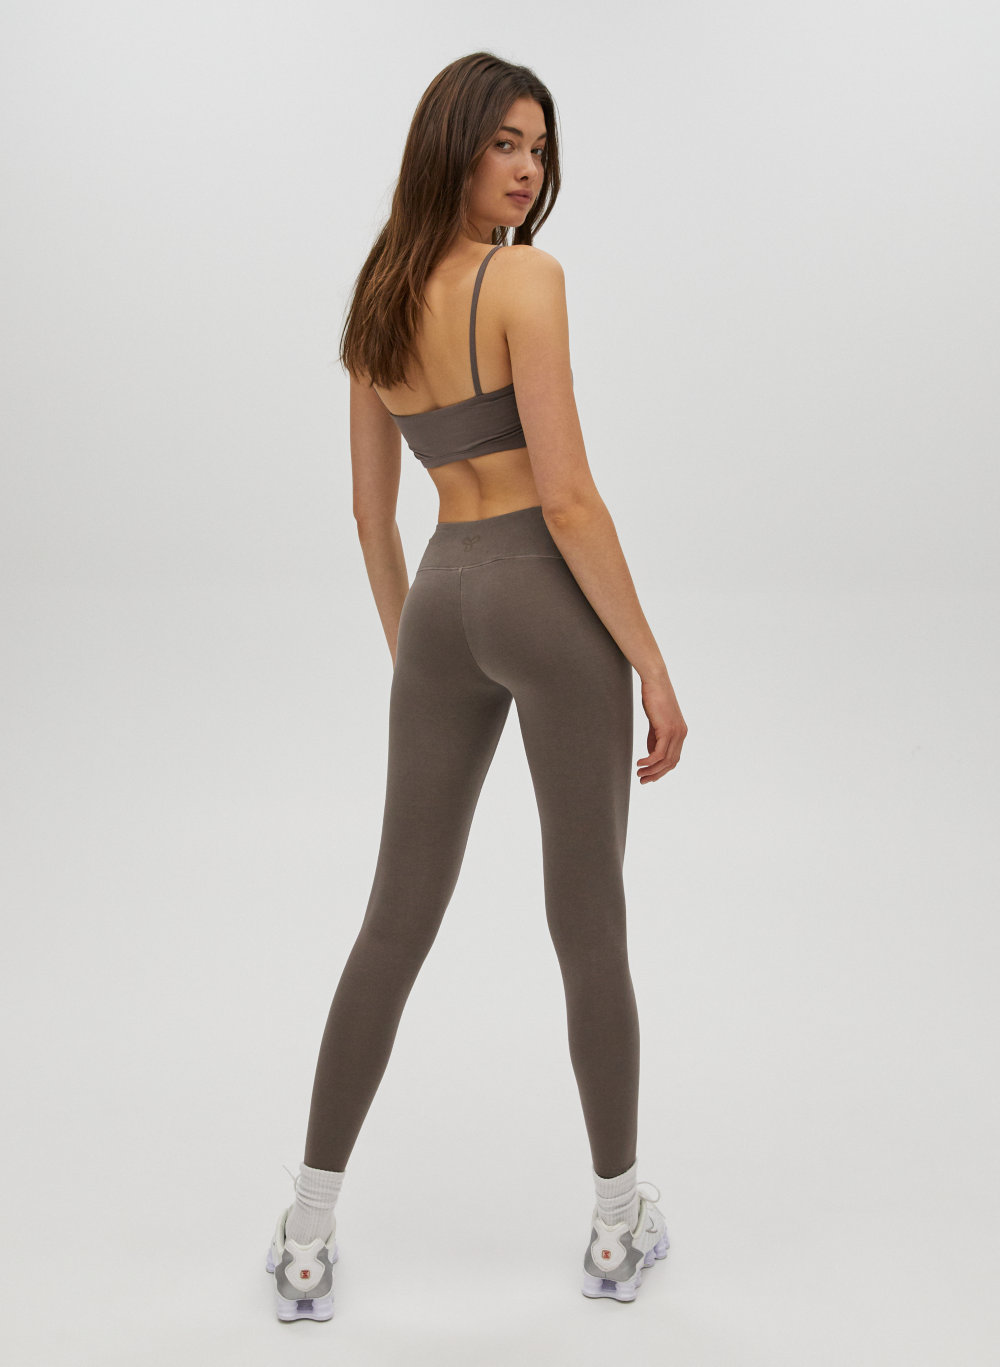 Aritzia Tna Leggings Review  International Society of Precision Agriculture